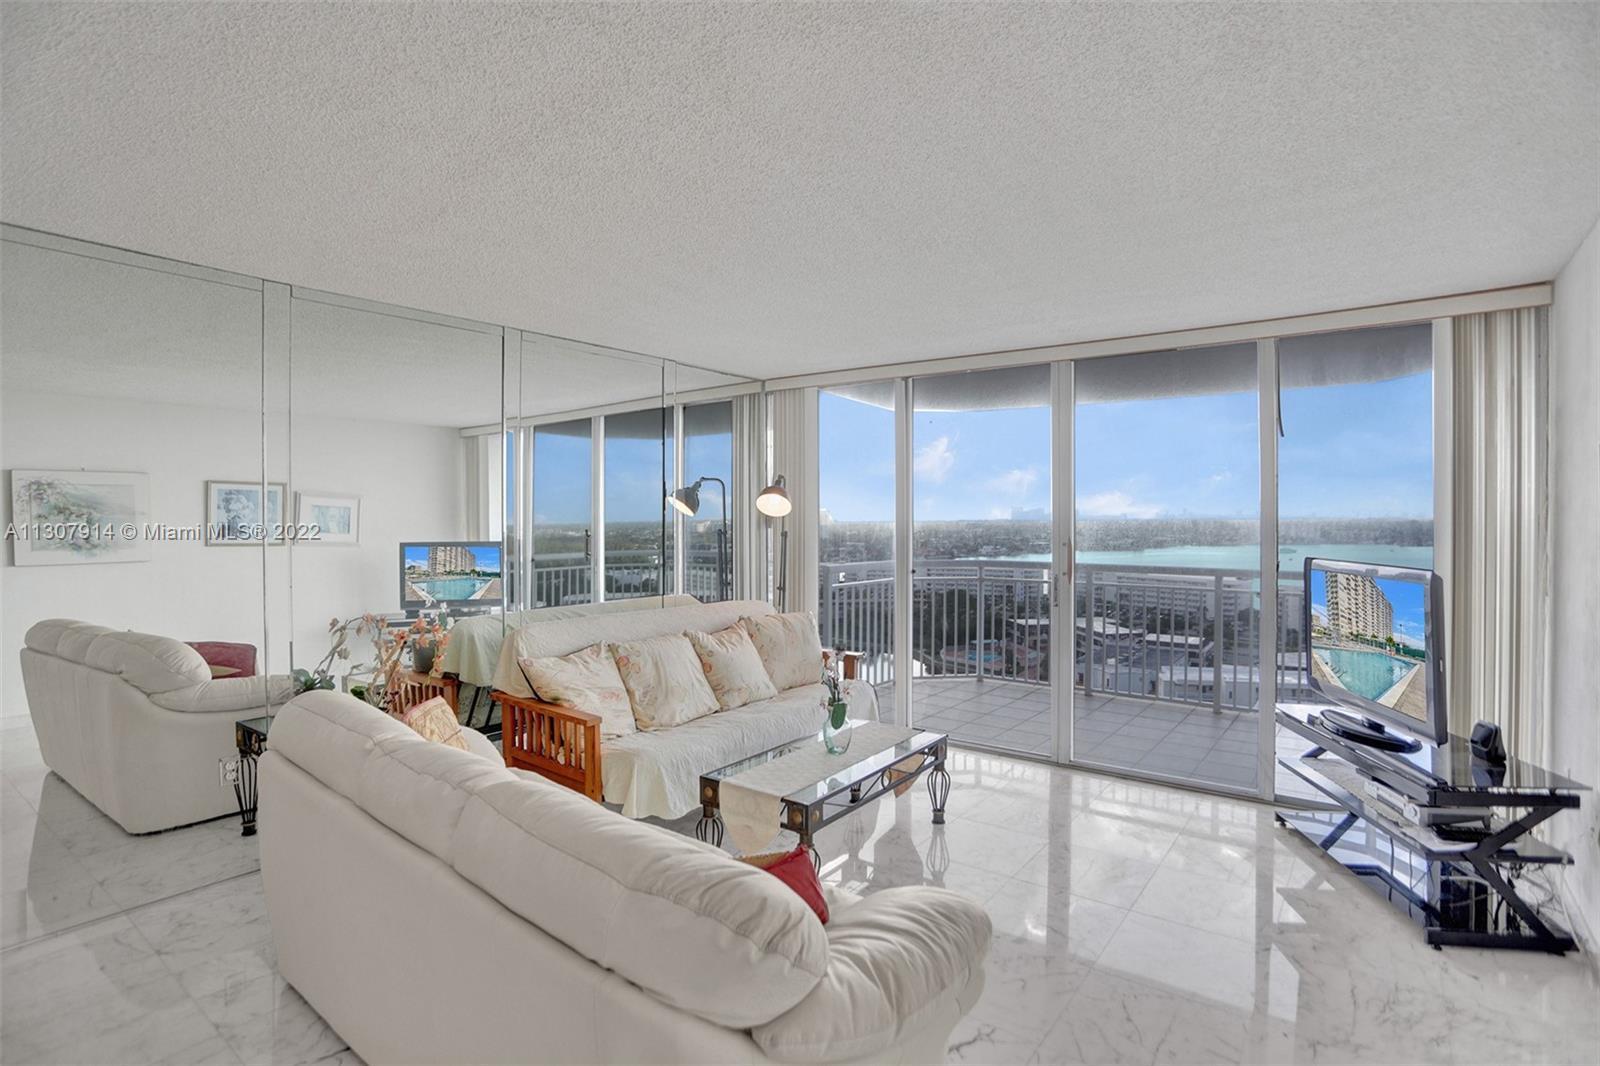 Spectacular water & city views from every window of this charming 1 Bed/ 1.5 Bath Del Pardo Aventura